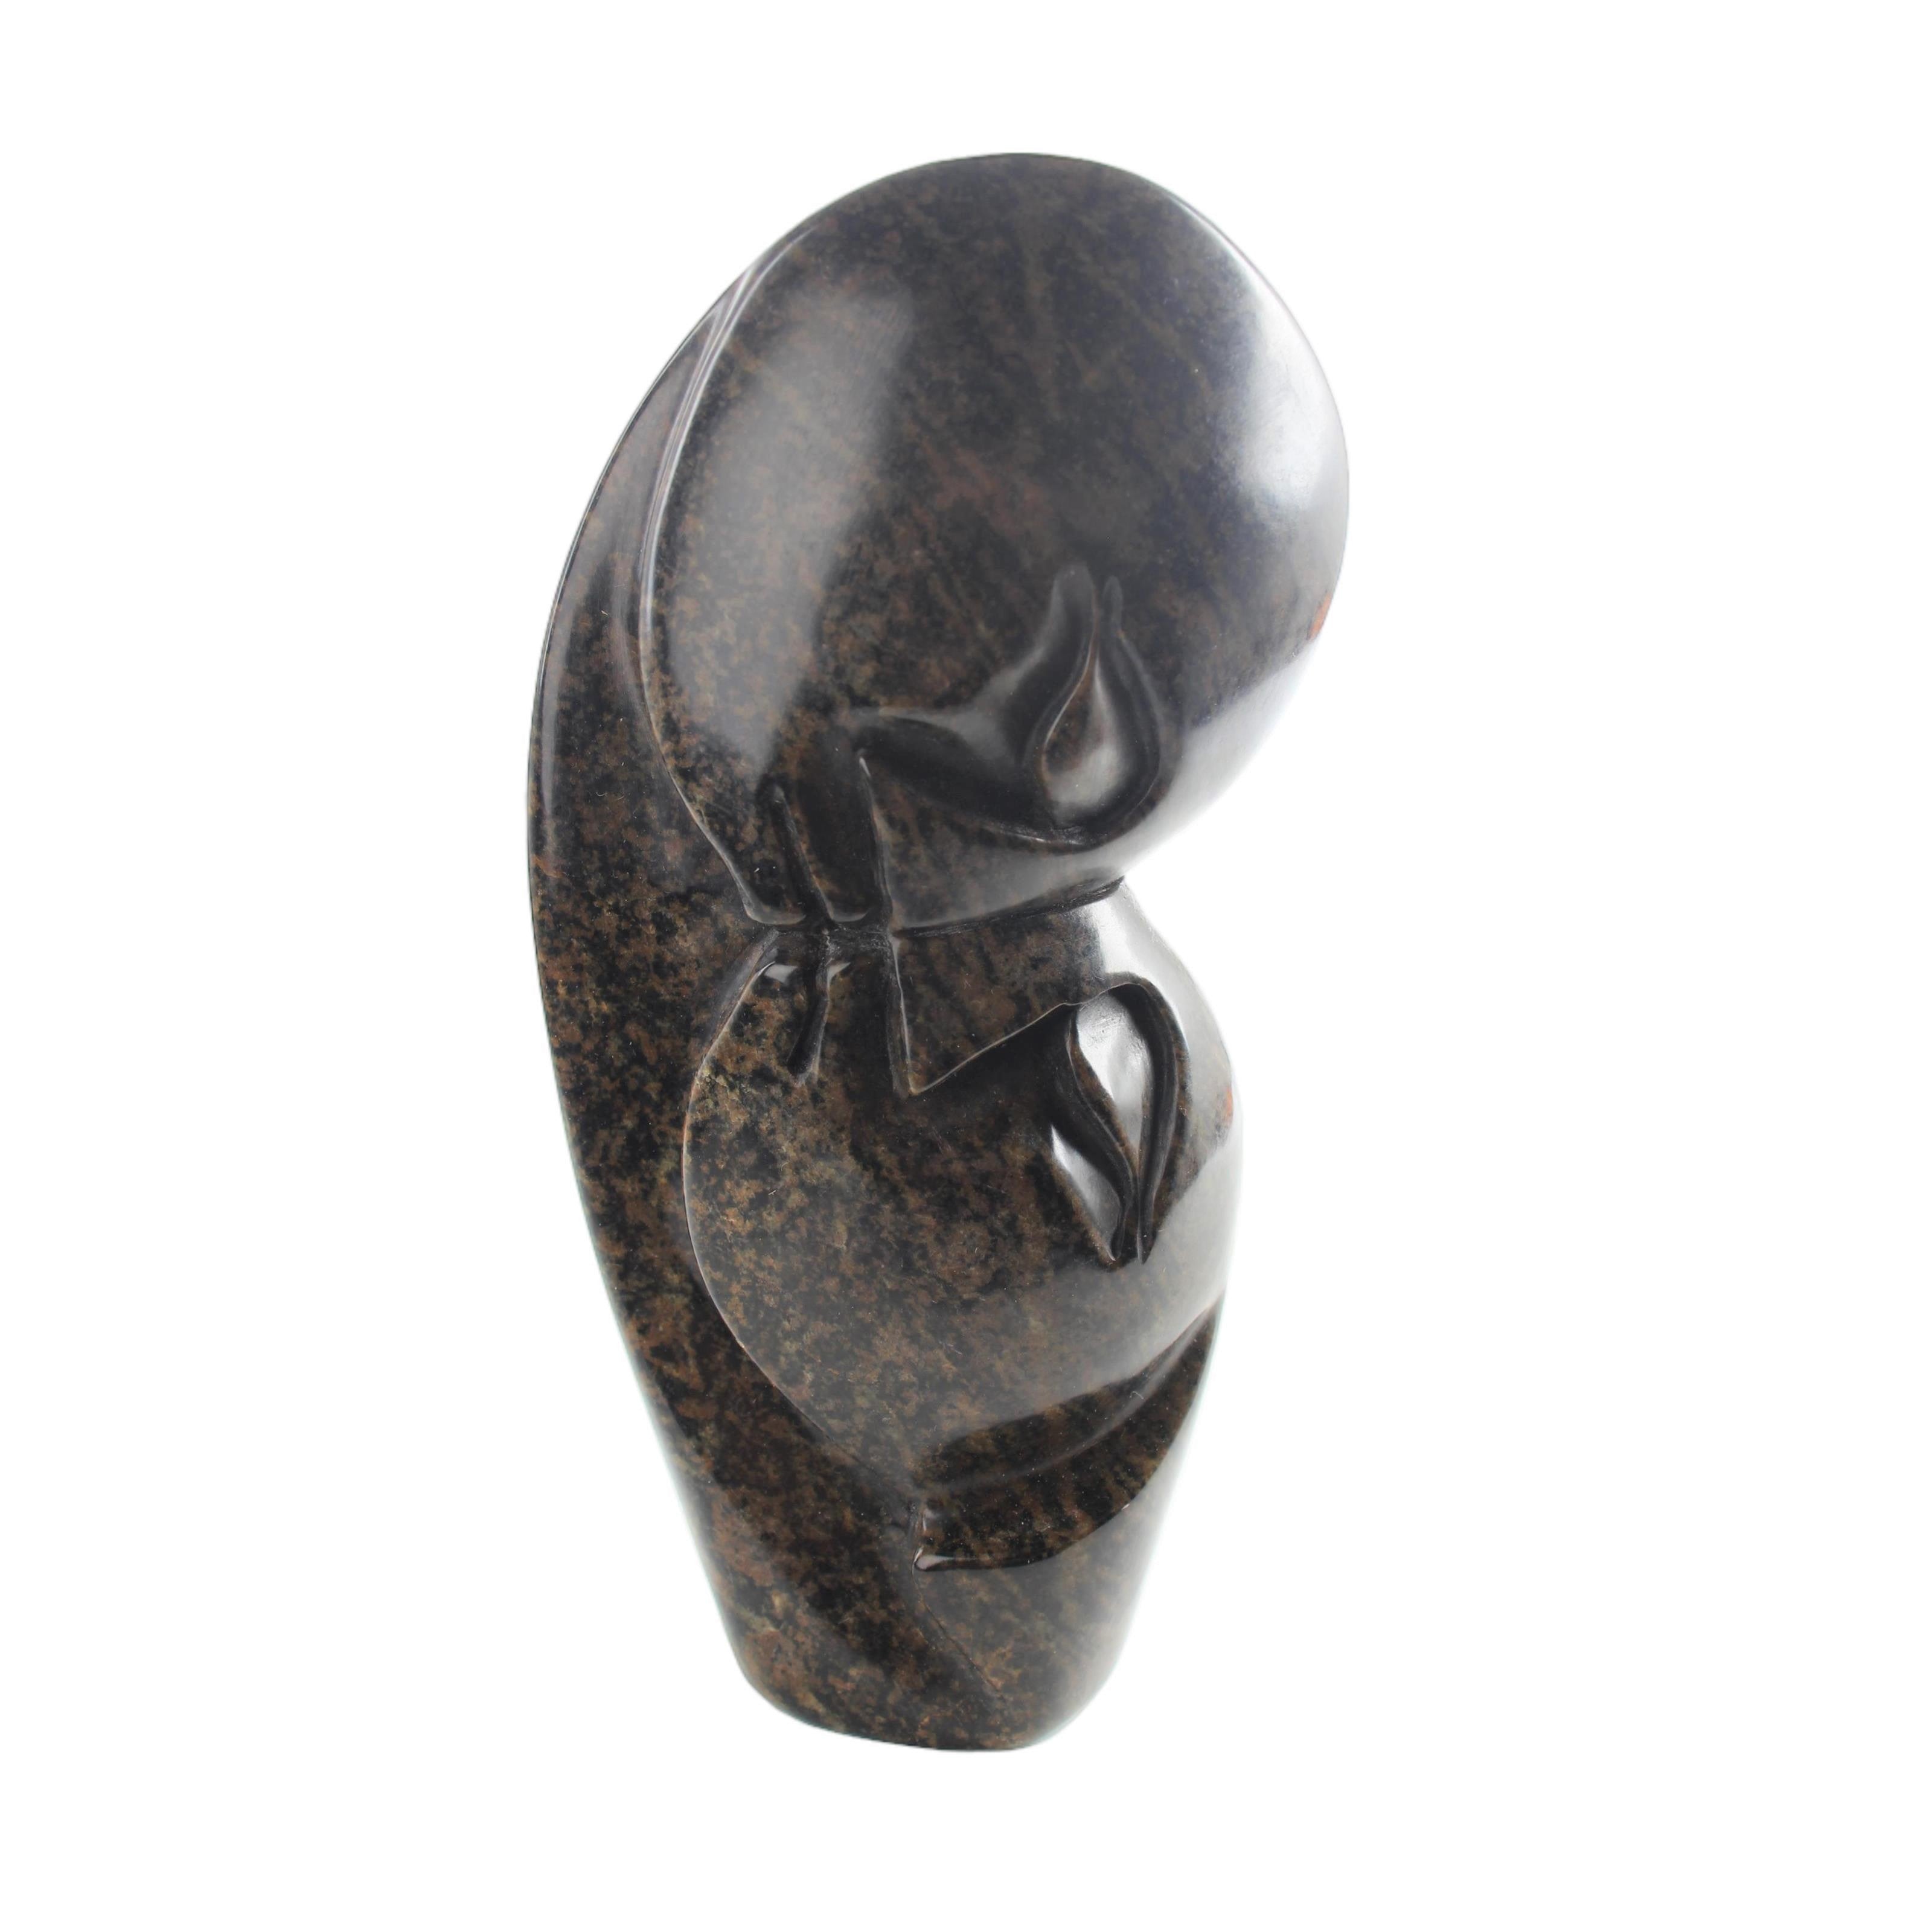 Shona Tribe Serpentine Stone Lovers ~8.7" Tall - Lovers